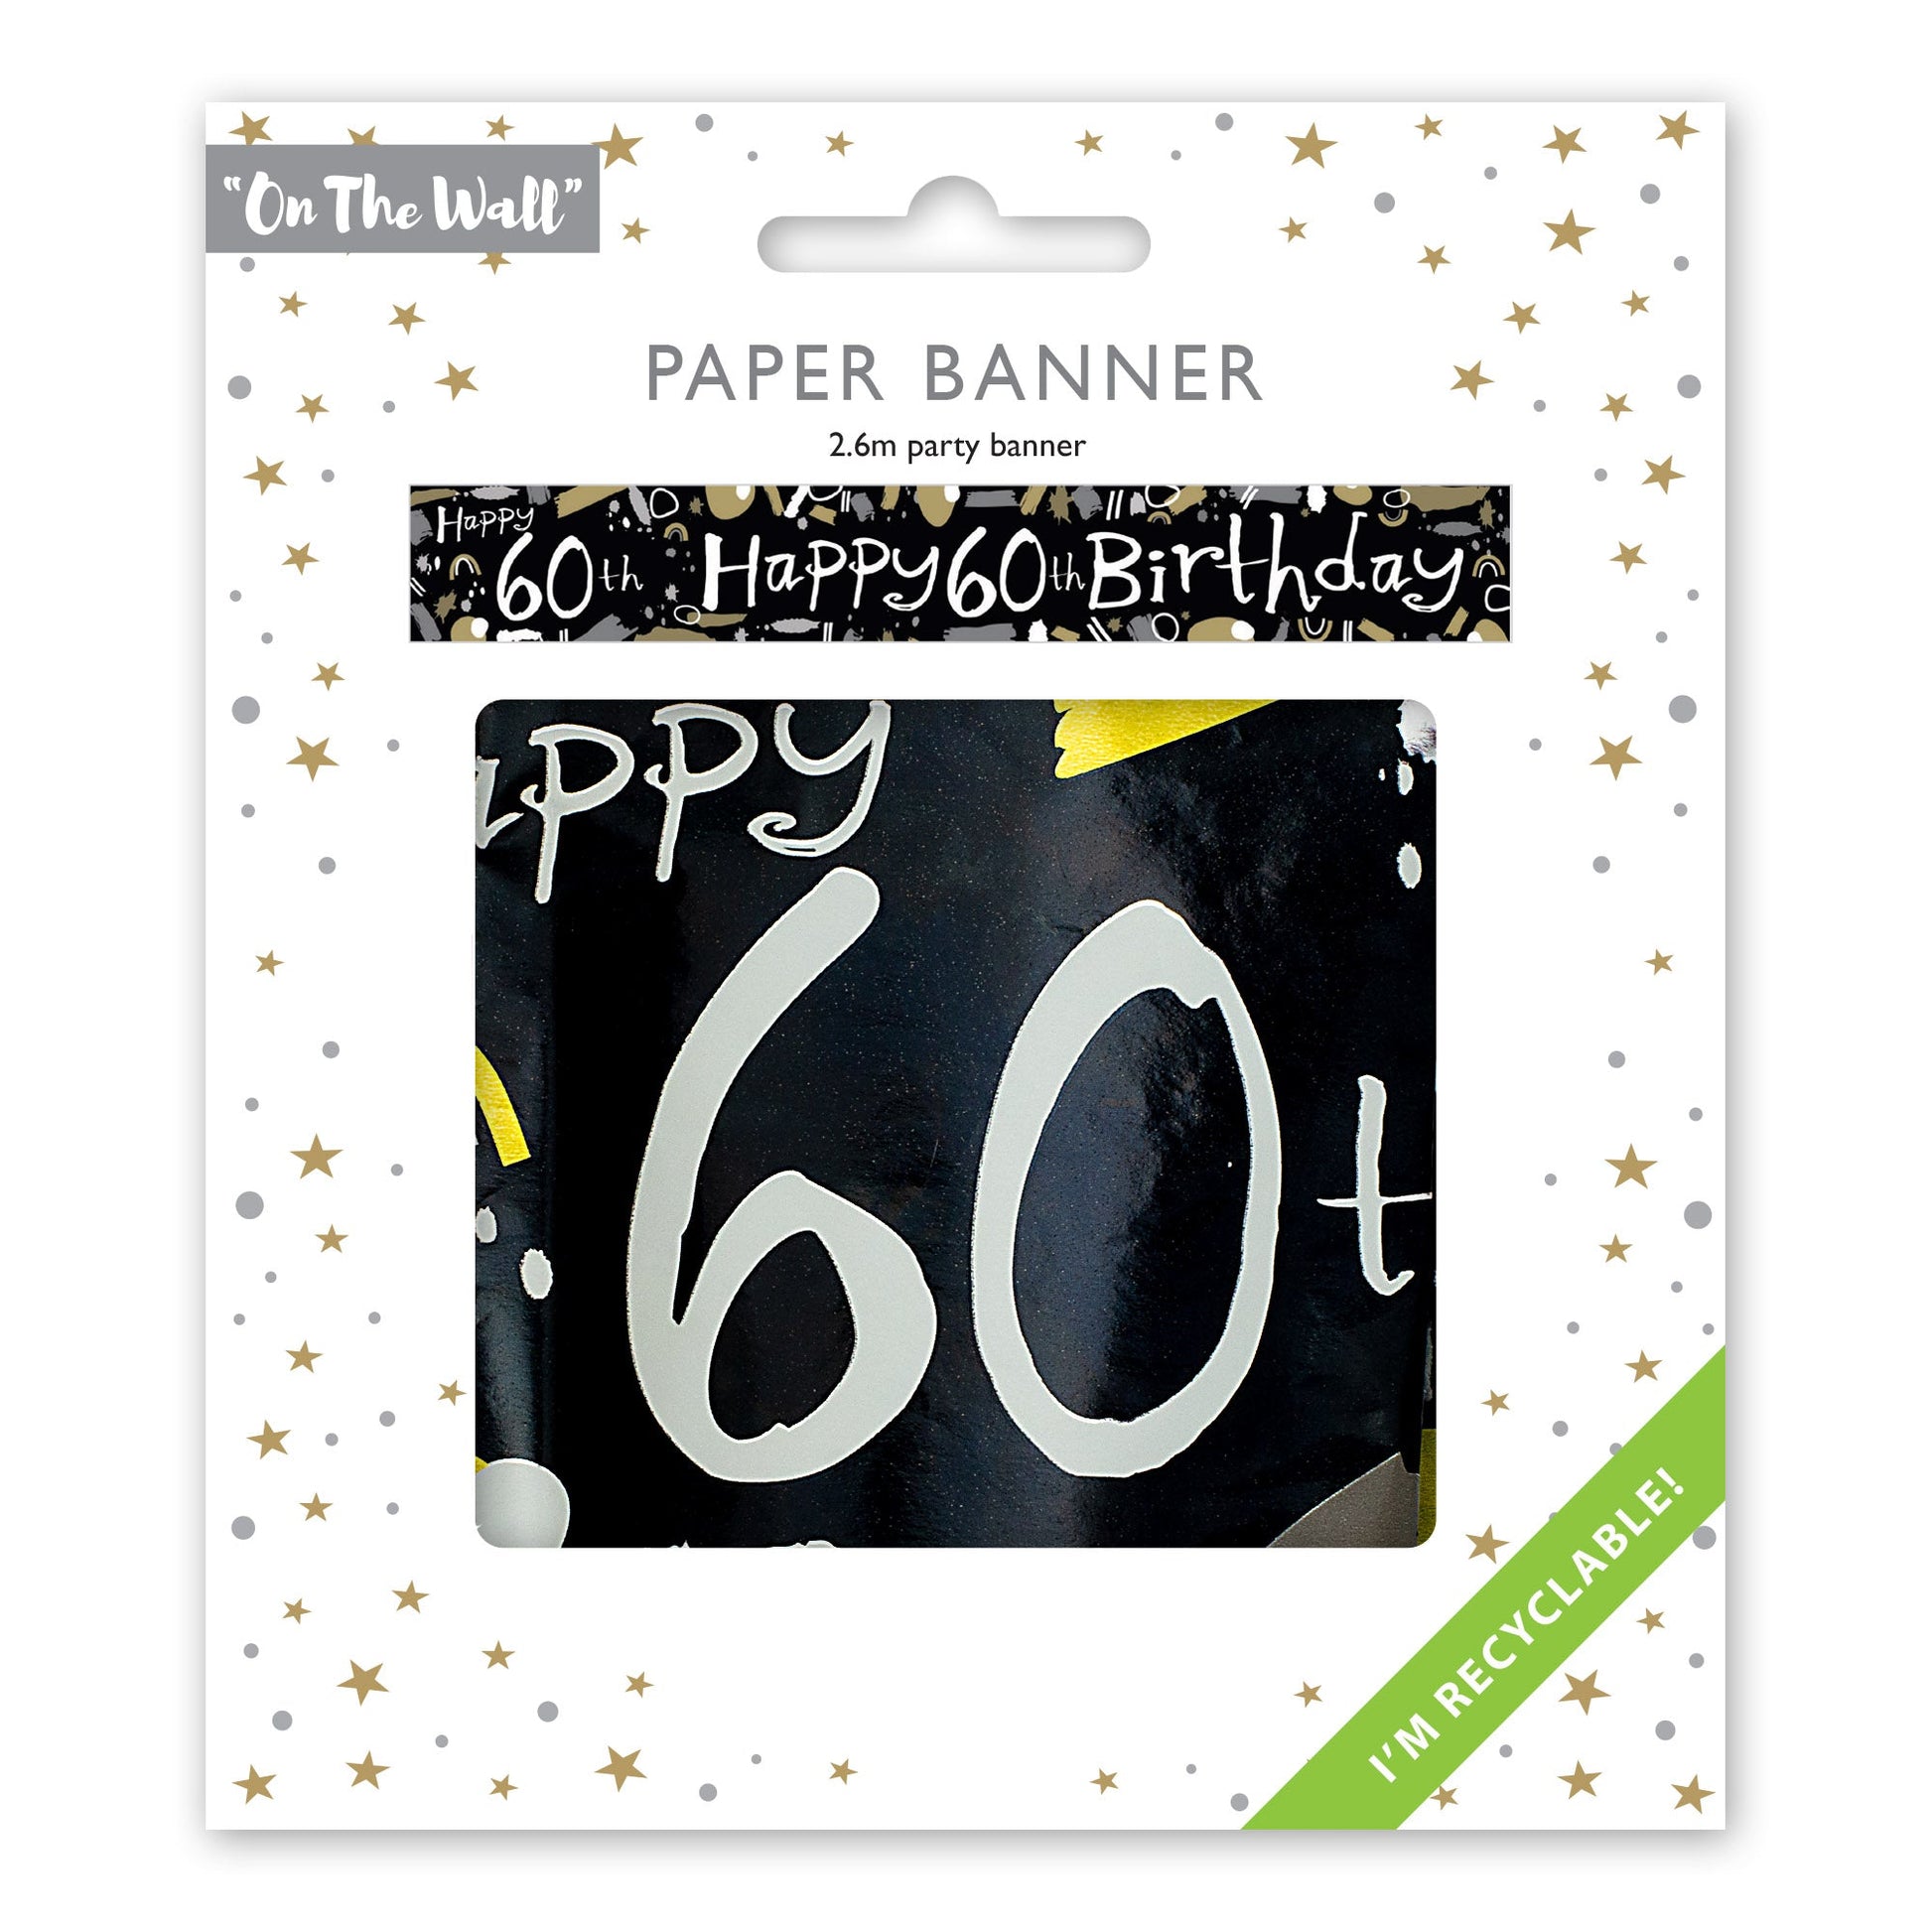 Age 60 Recyclable Paper Banner in Black & White 2